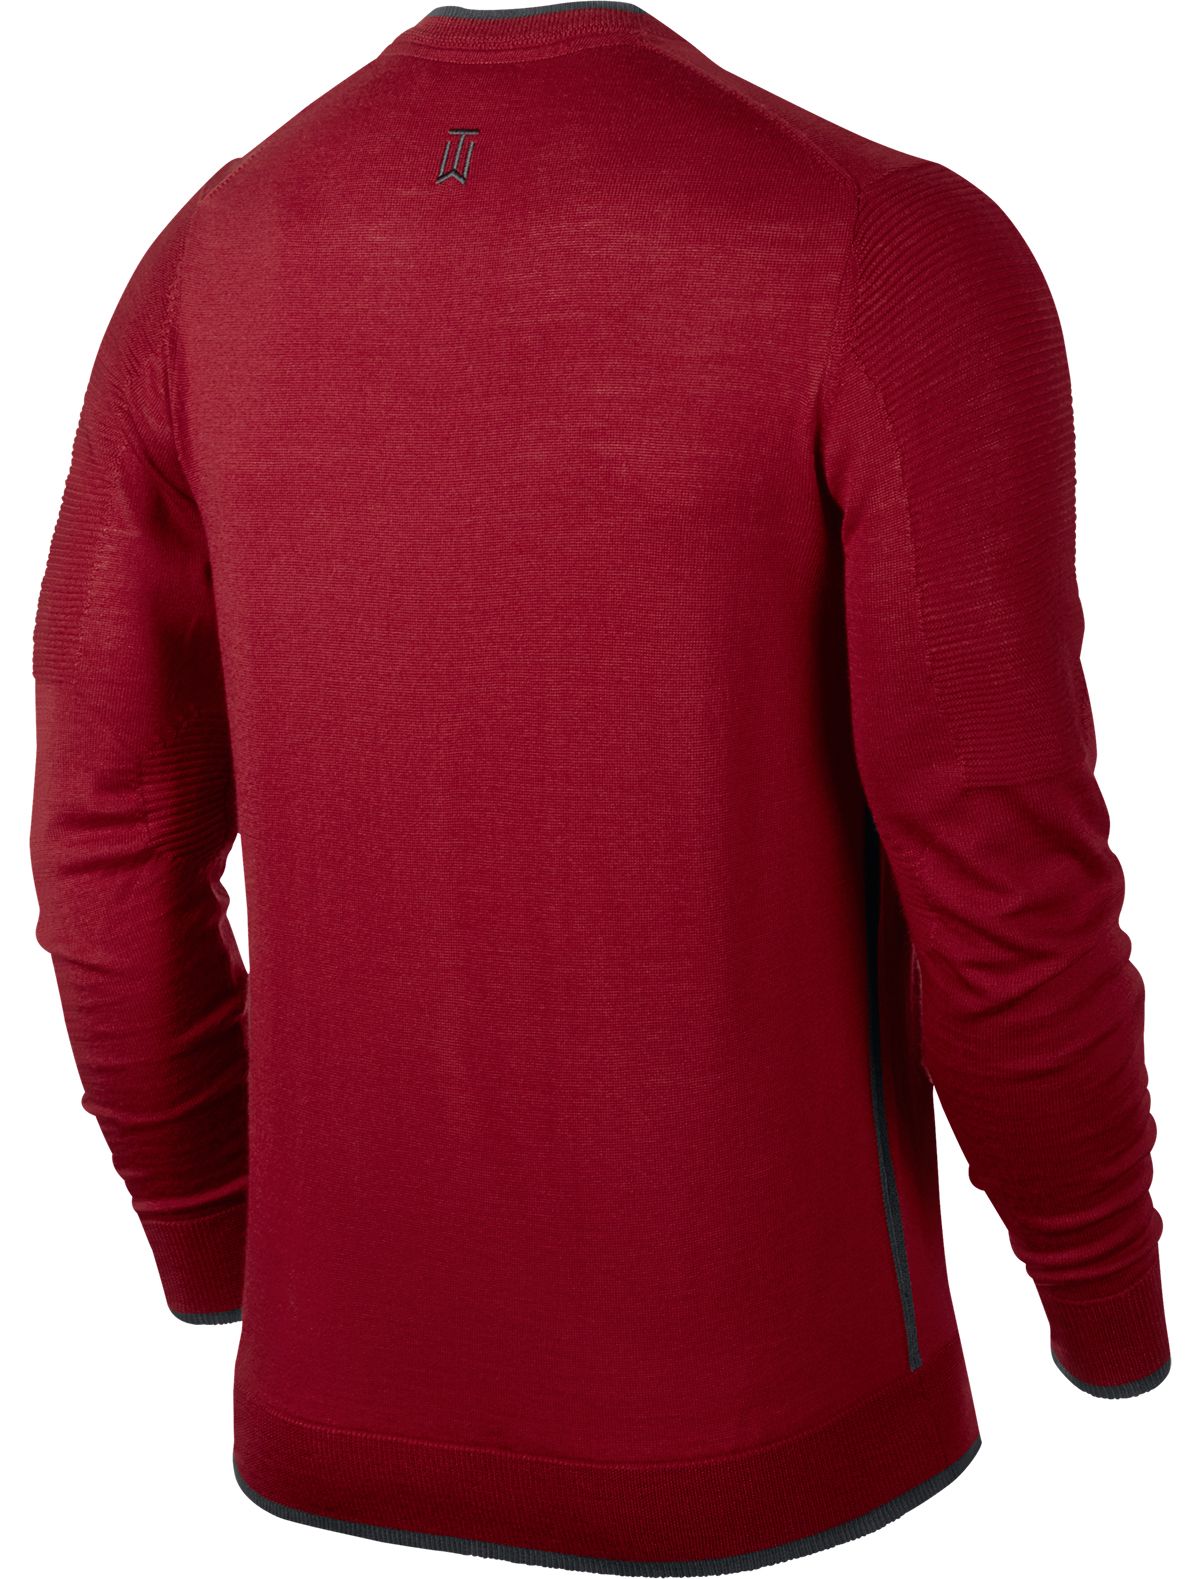 tiger woods red nike sweater